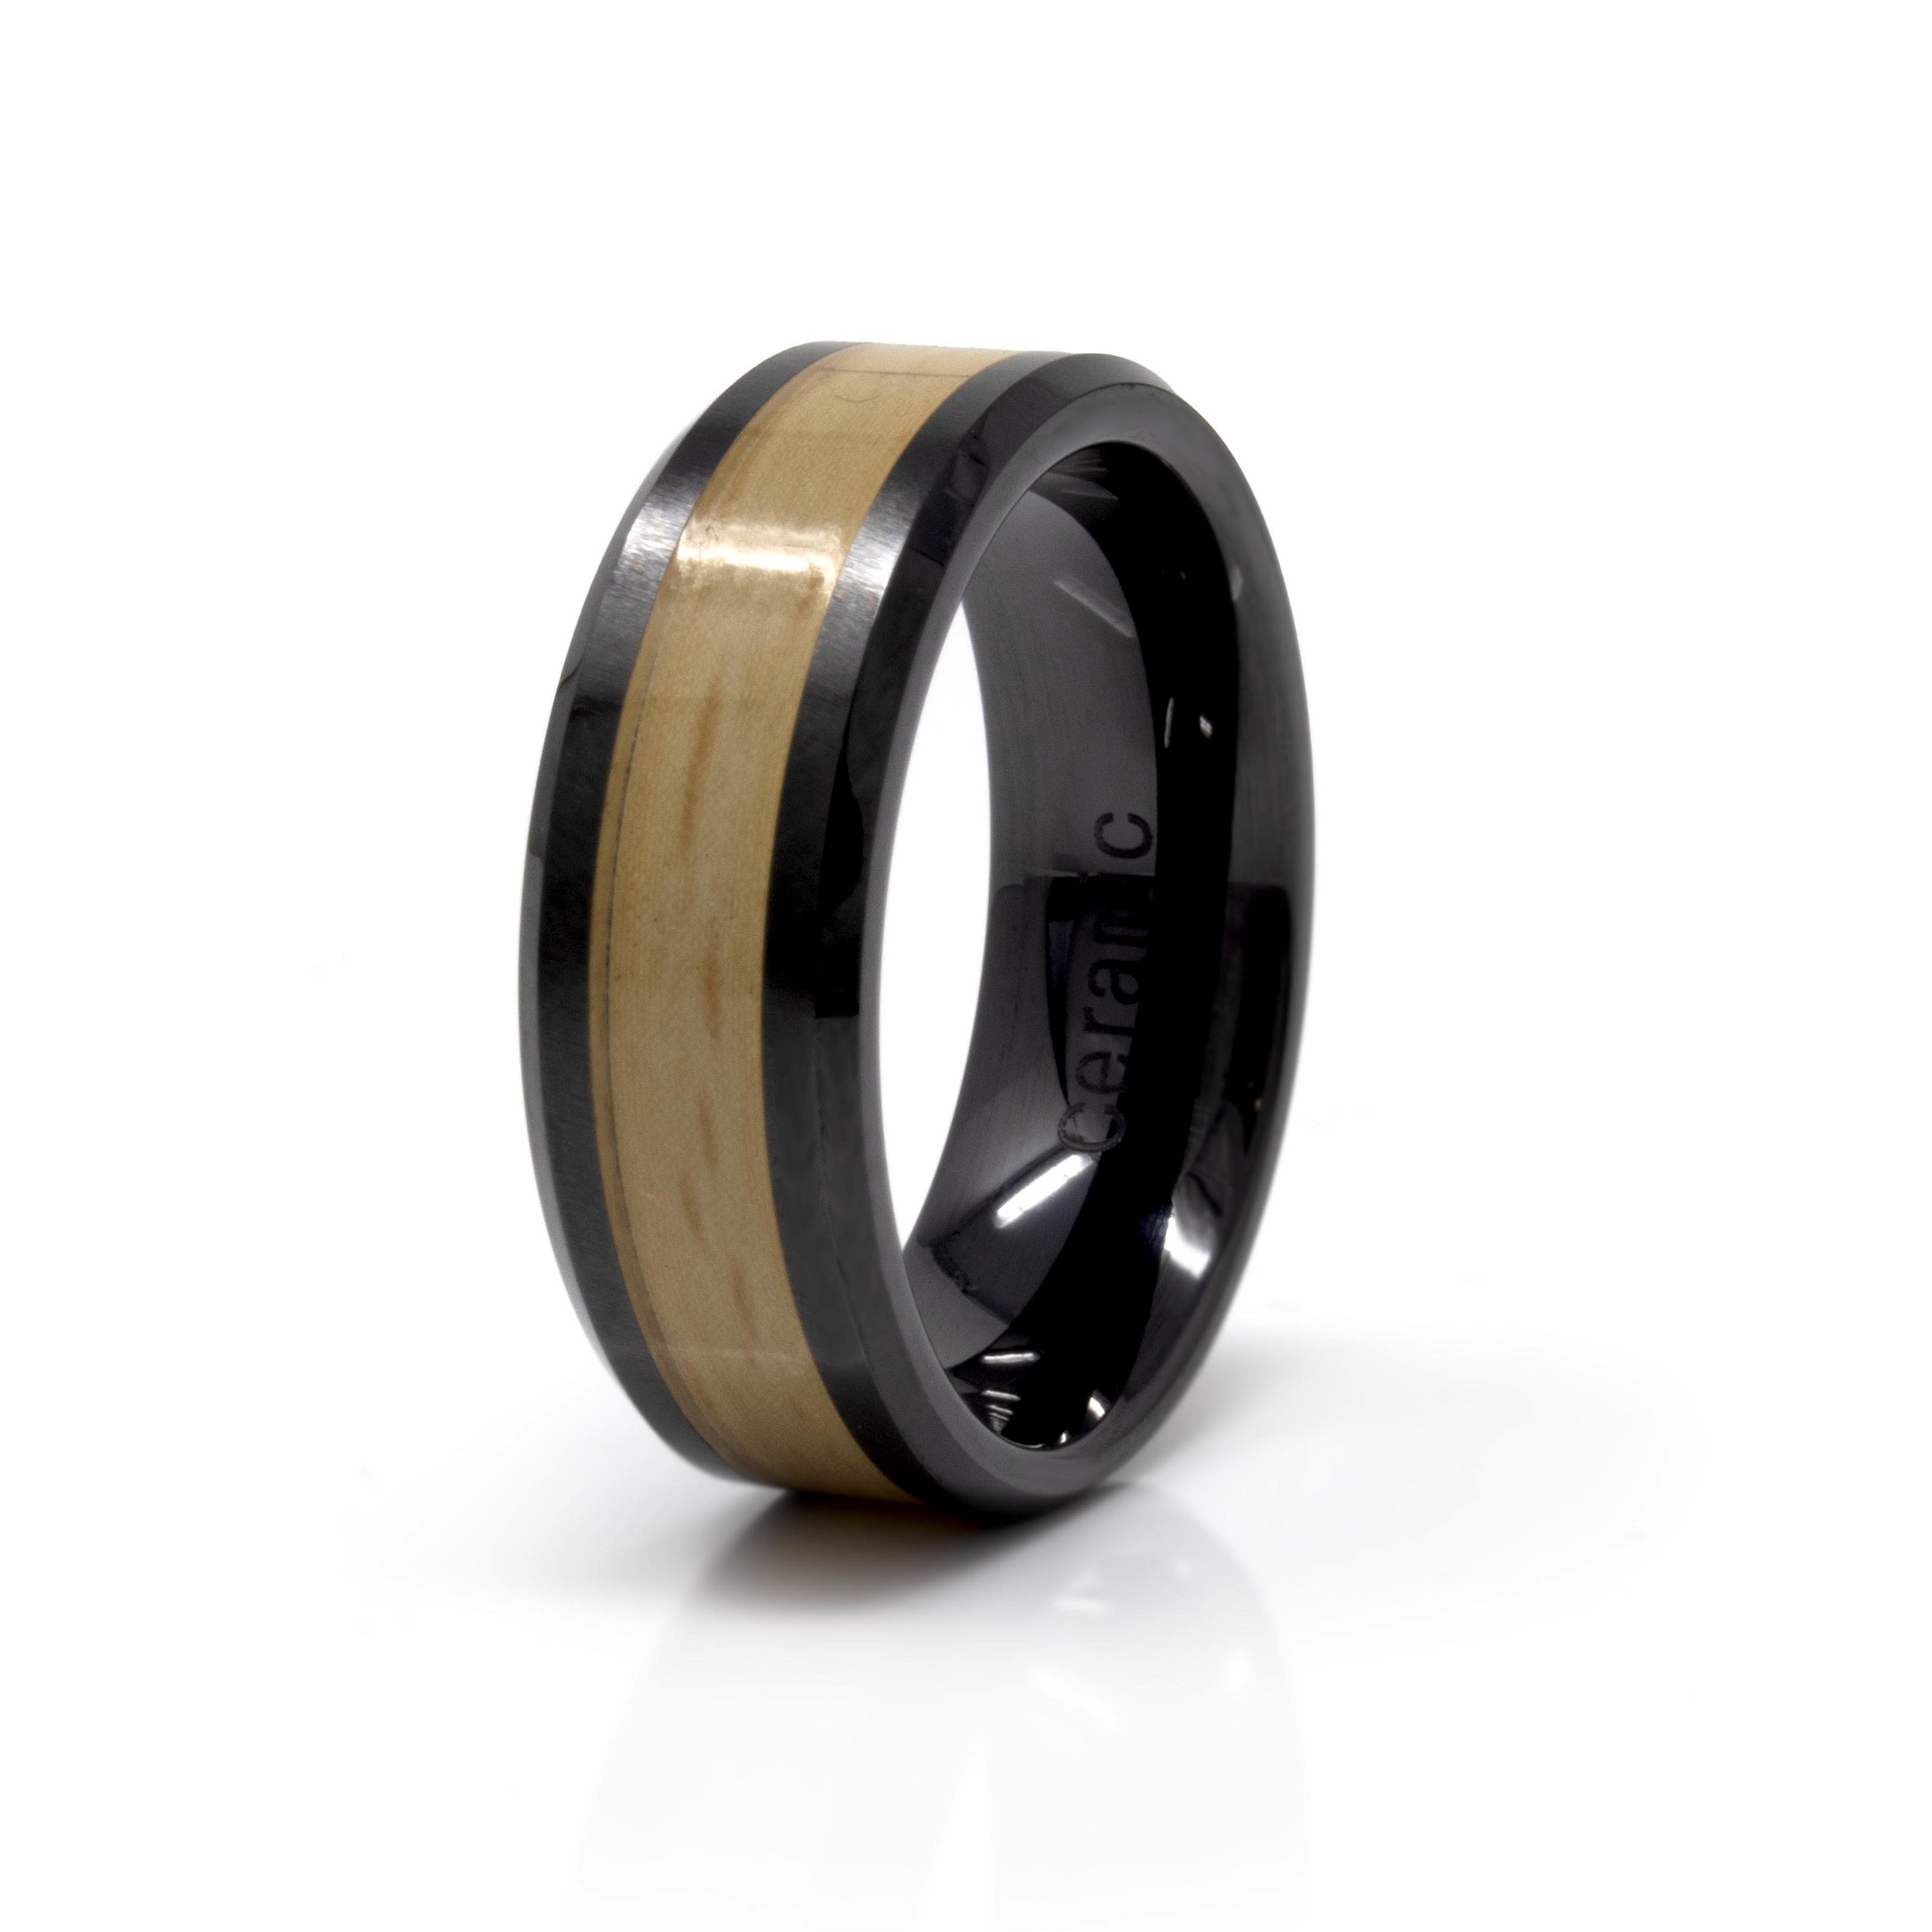 Ceramic Ring Size 11 - 8mm With Black Ip Plated & Wood Inlay Center